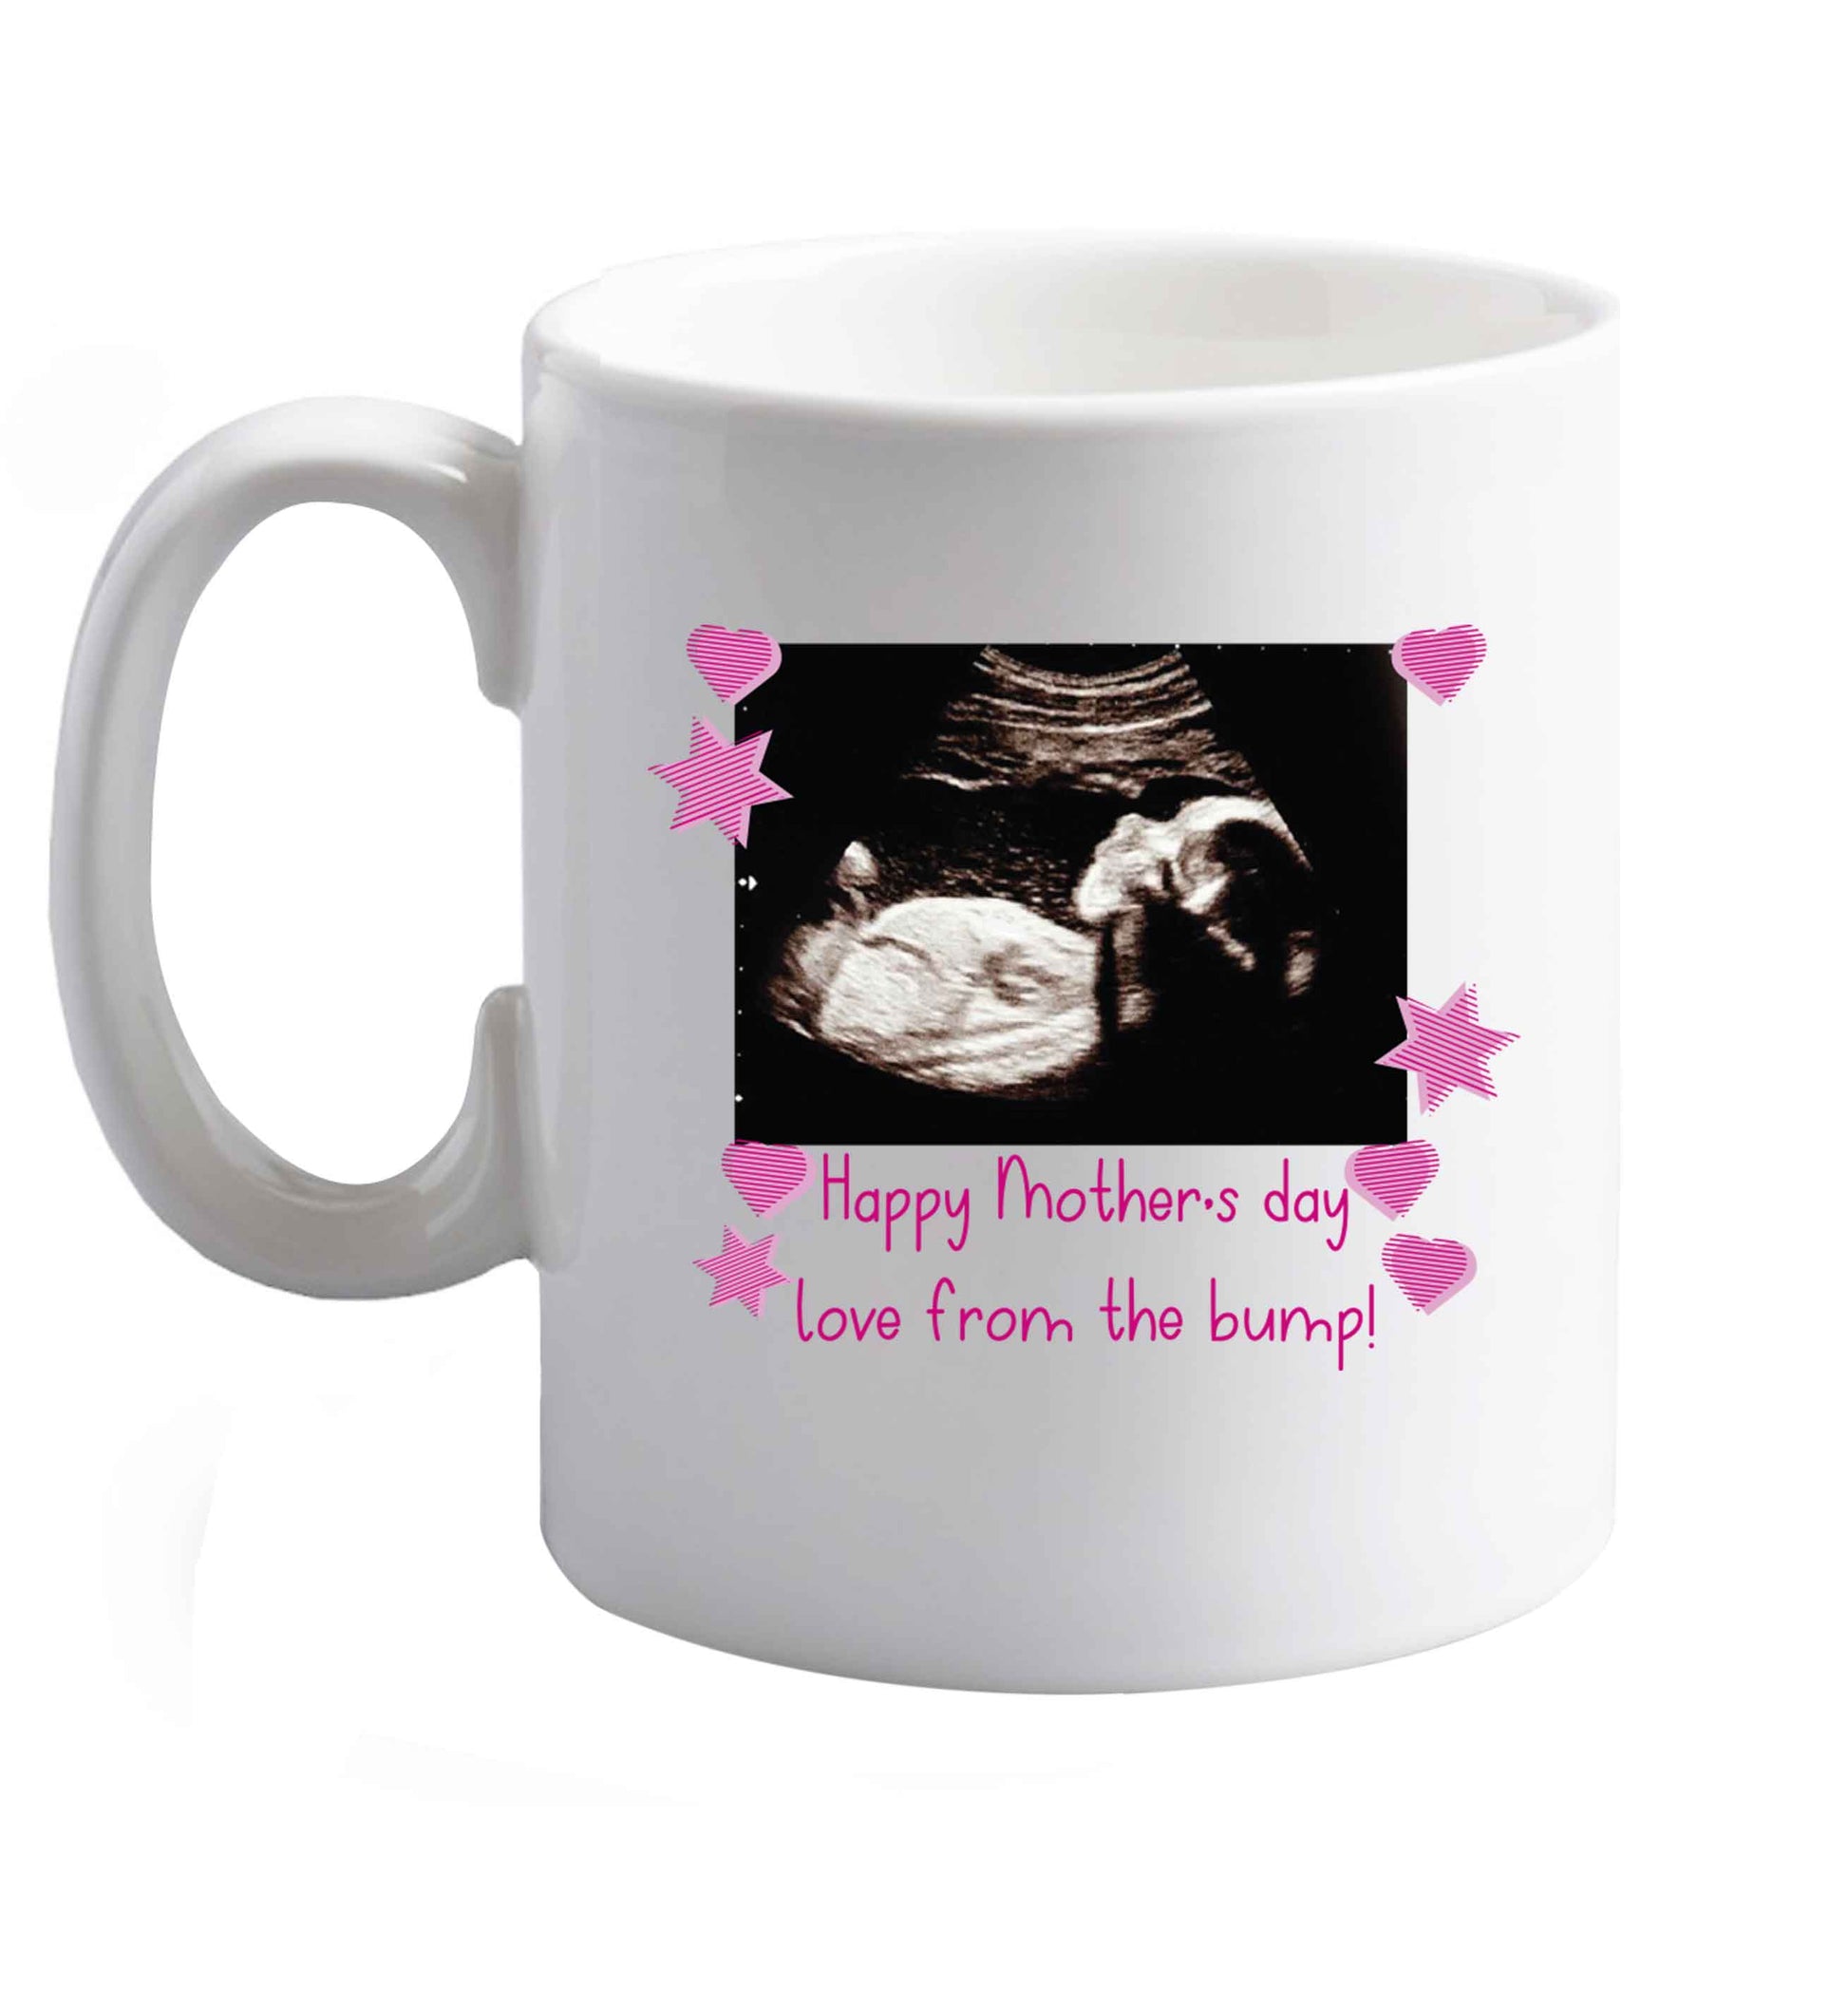 10 oz Happy Mother's day love from the bump - pink  ceramic mug right handed